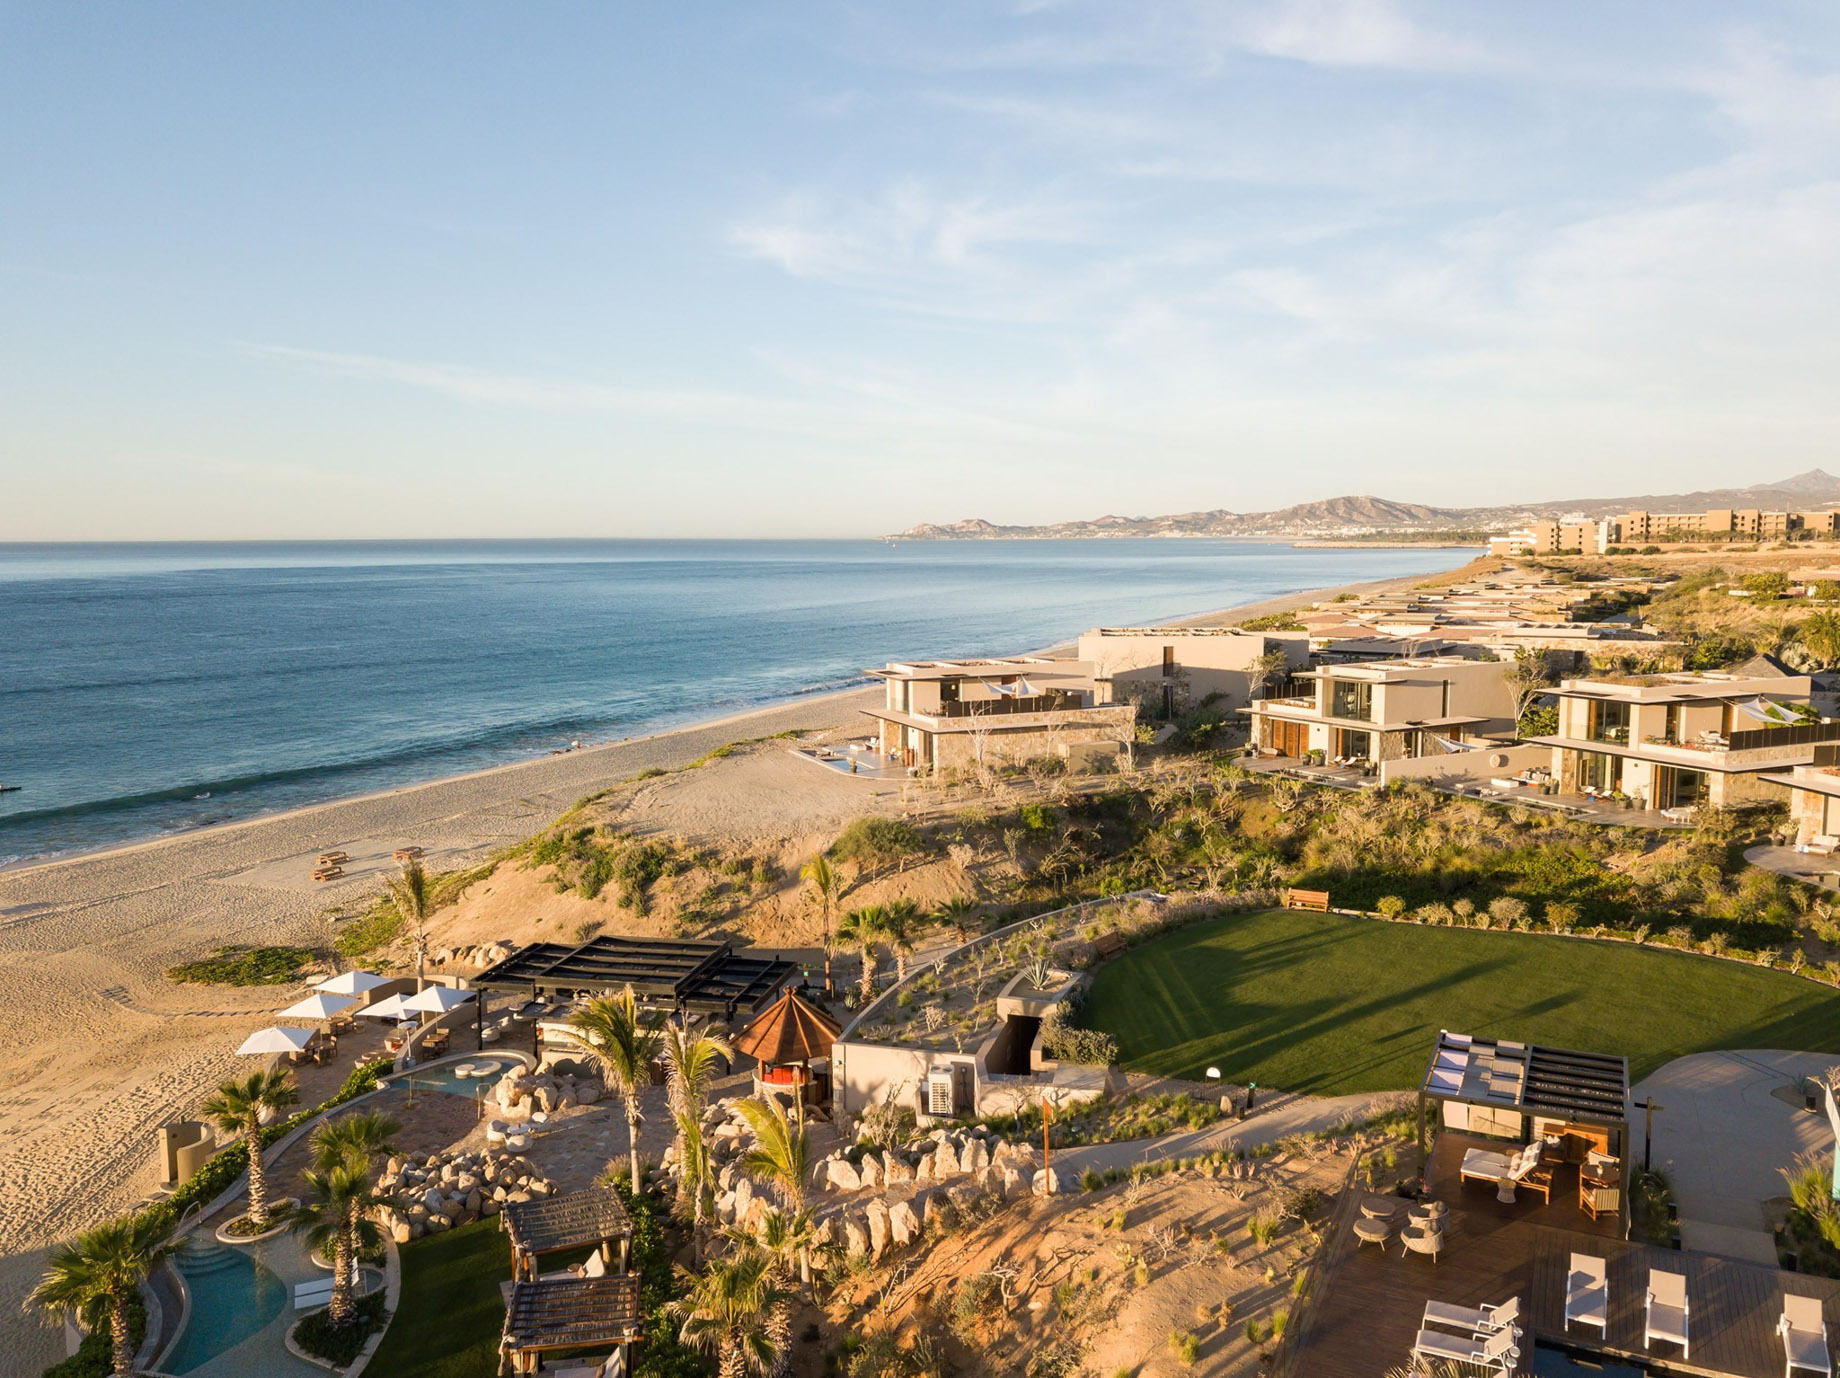 The Ritz-Carlton, Zadun Reserve Resort – Los Cabos, Mexico – Equis Beachfront Lounge Aerial View